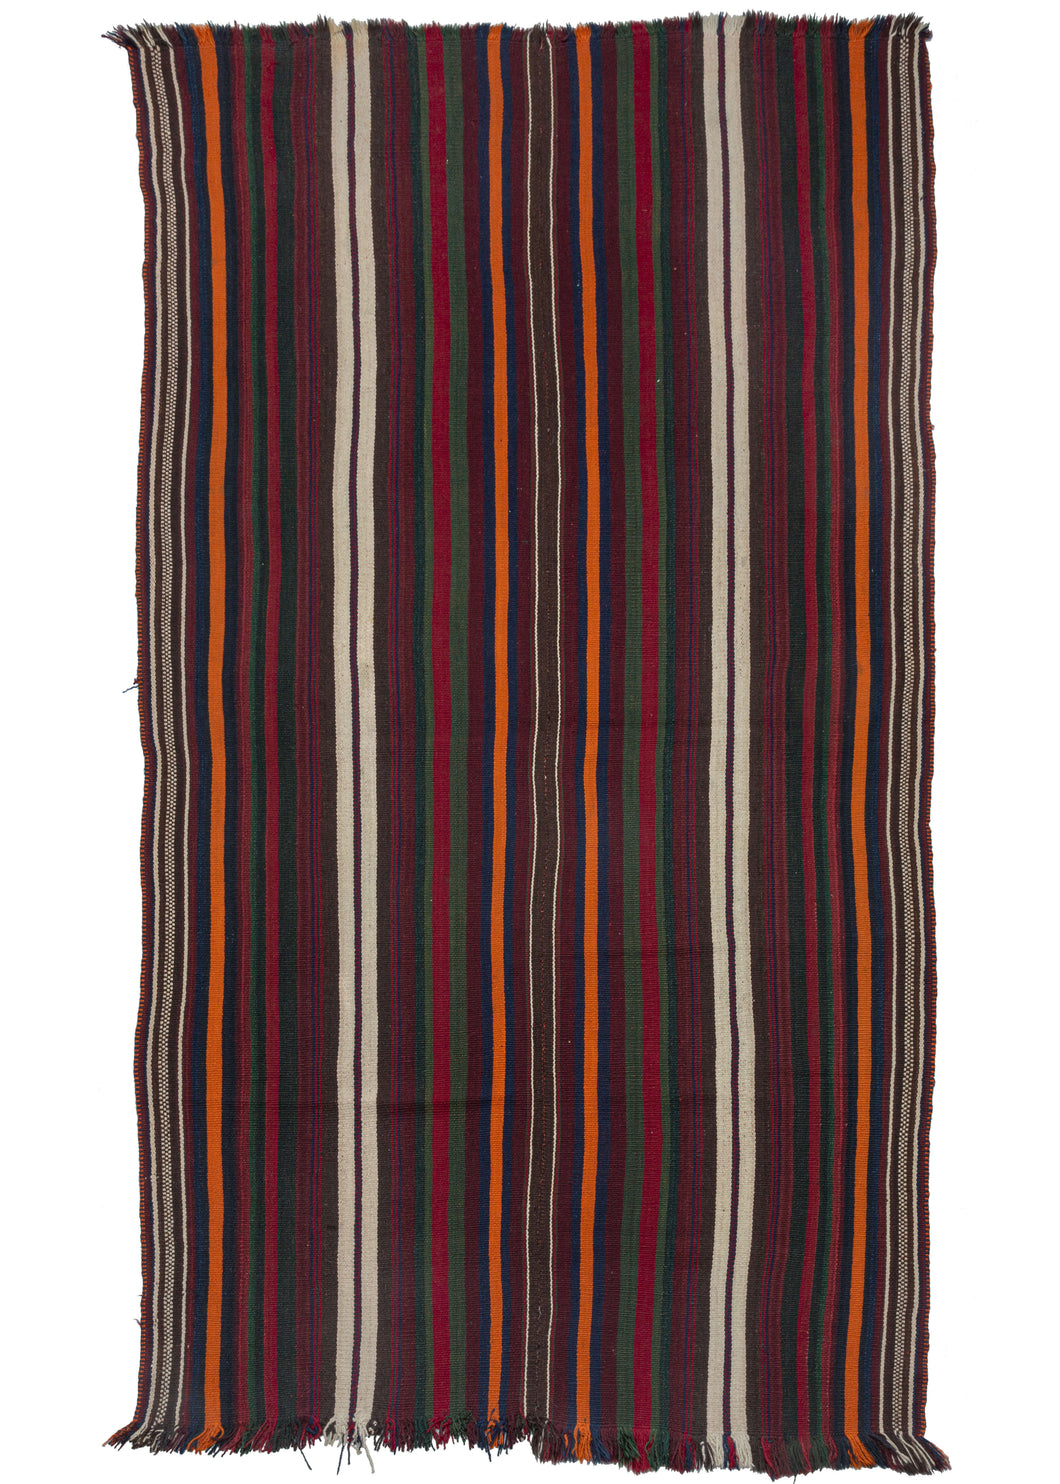 South Persian Qashqa'i warp facing kilim featuring simple yet striking stripes along the length of the runner in orange, green, blue and prominent shades of red and maroon. Symmetrical in its patterning, two bold double white stripes pop on either side.